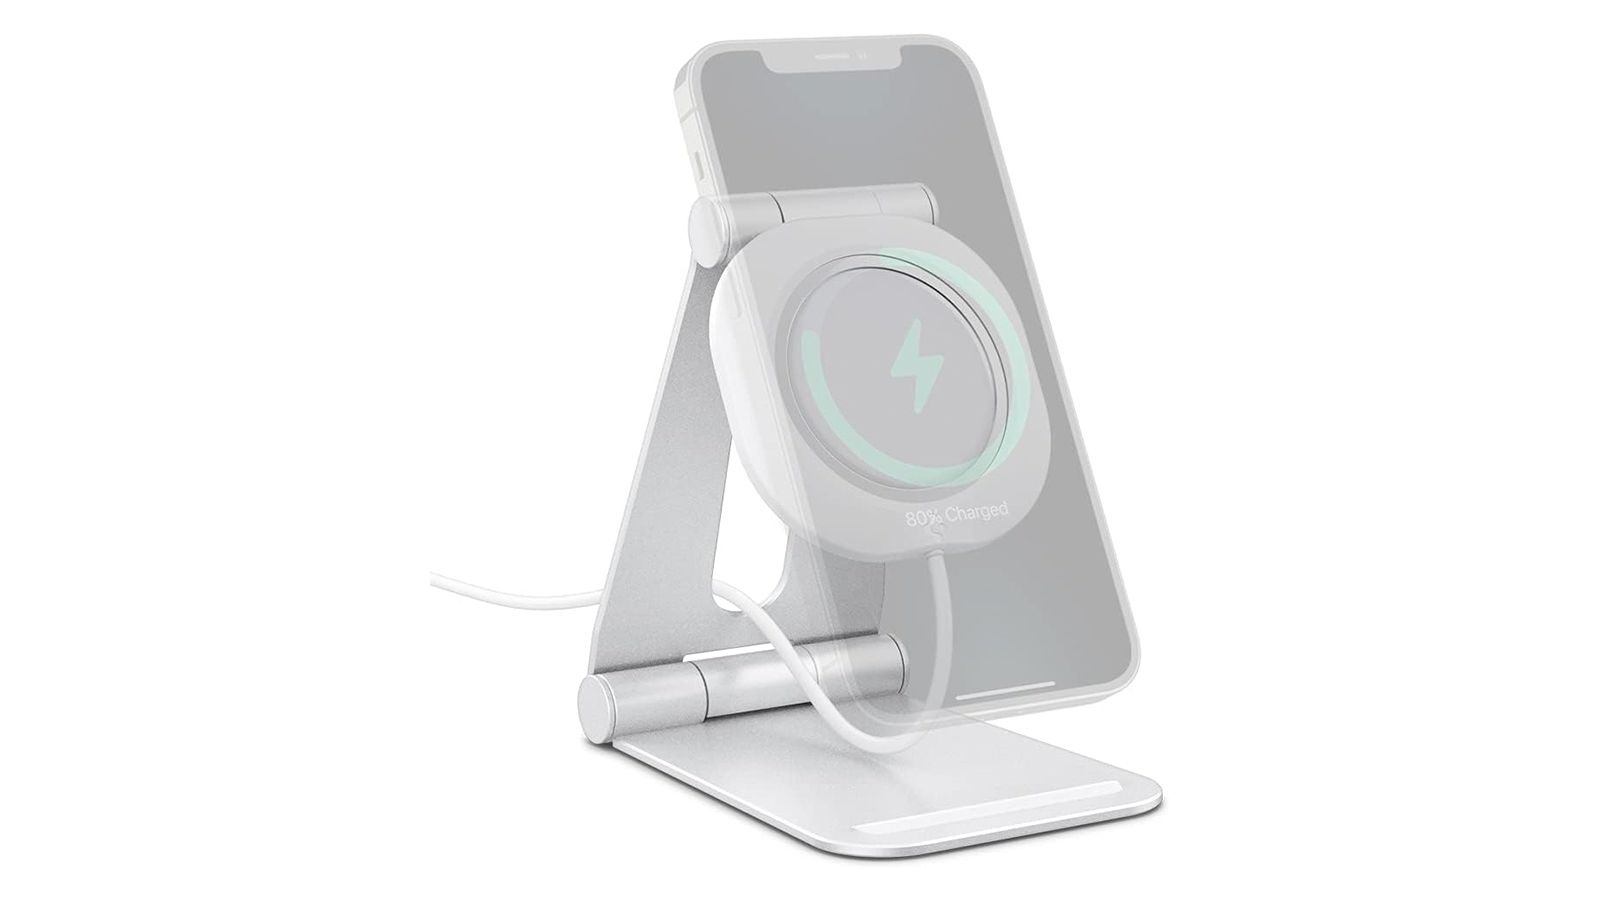 New affordable MagSafe charging stand from Spigen